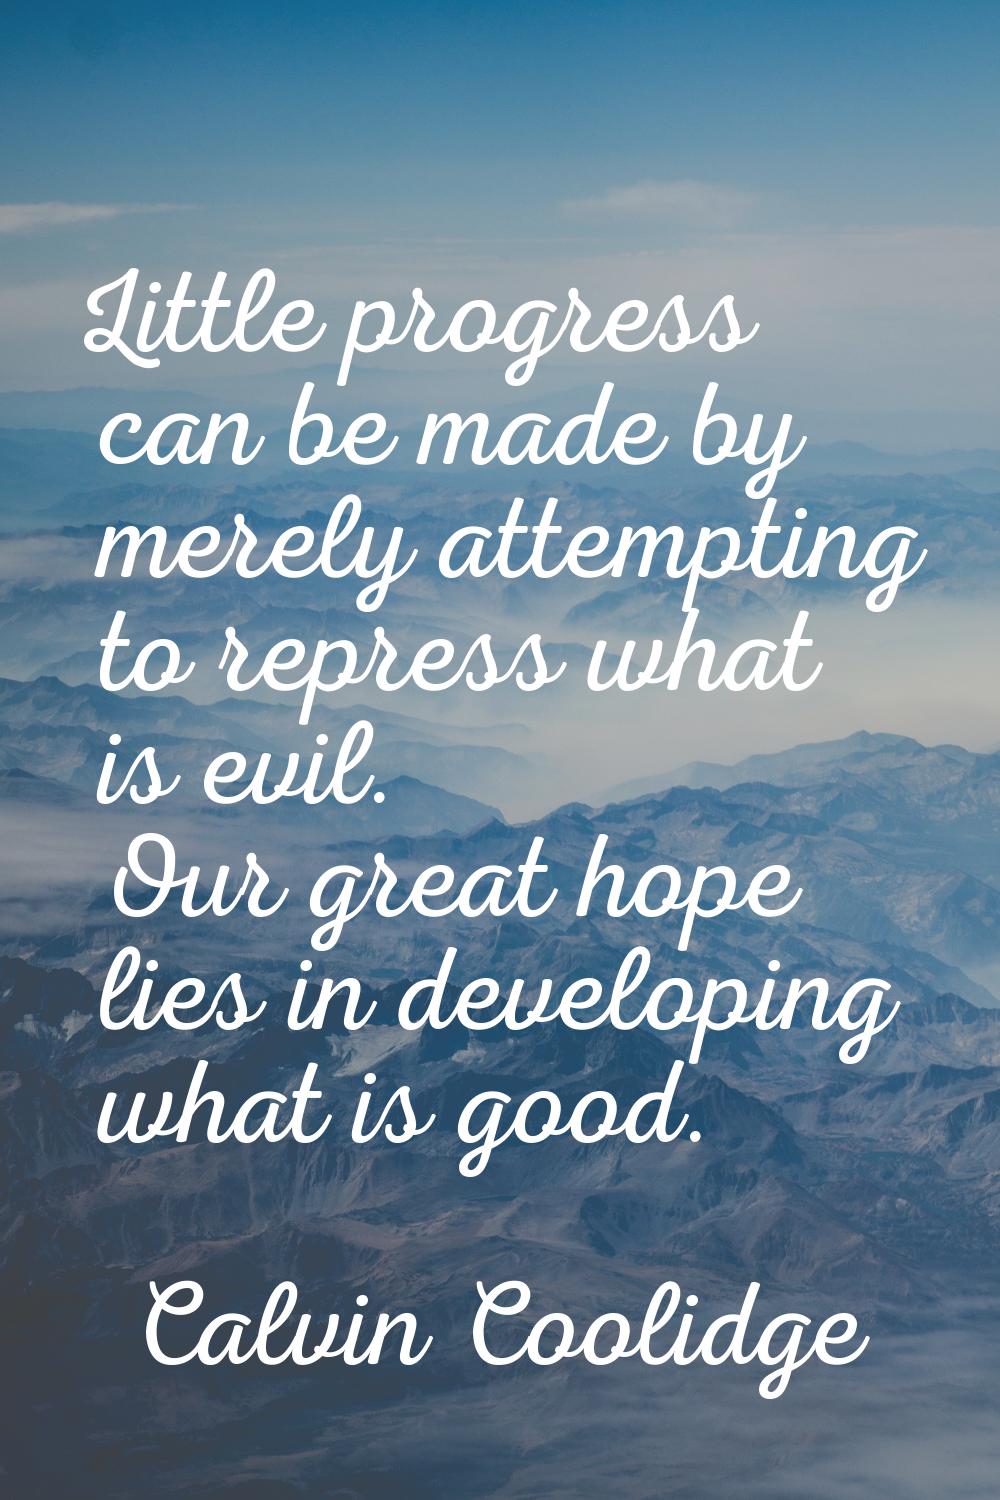 Little progress can be made by merely attempting to repress what is evil. Our great hope lies in de